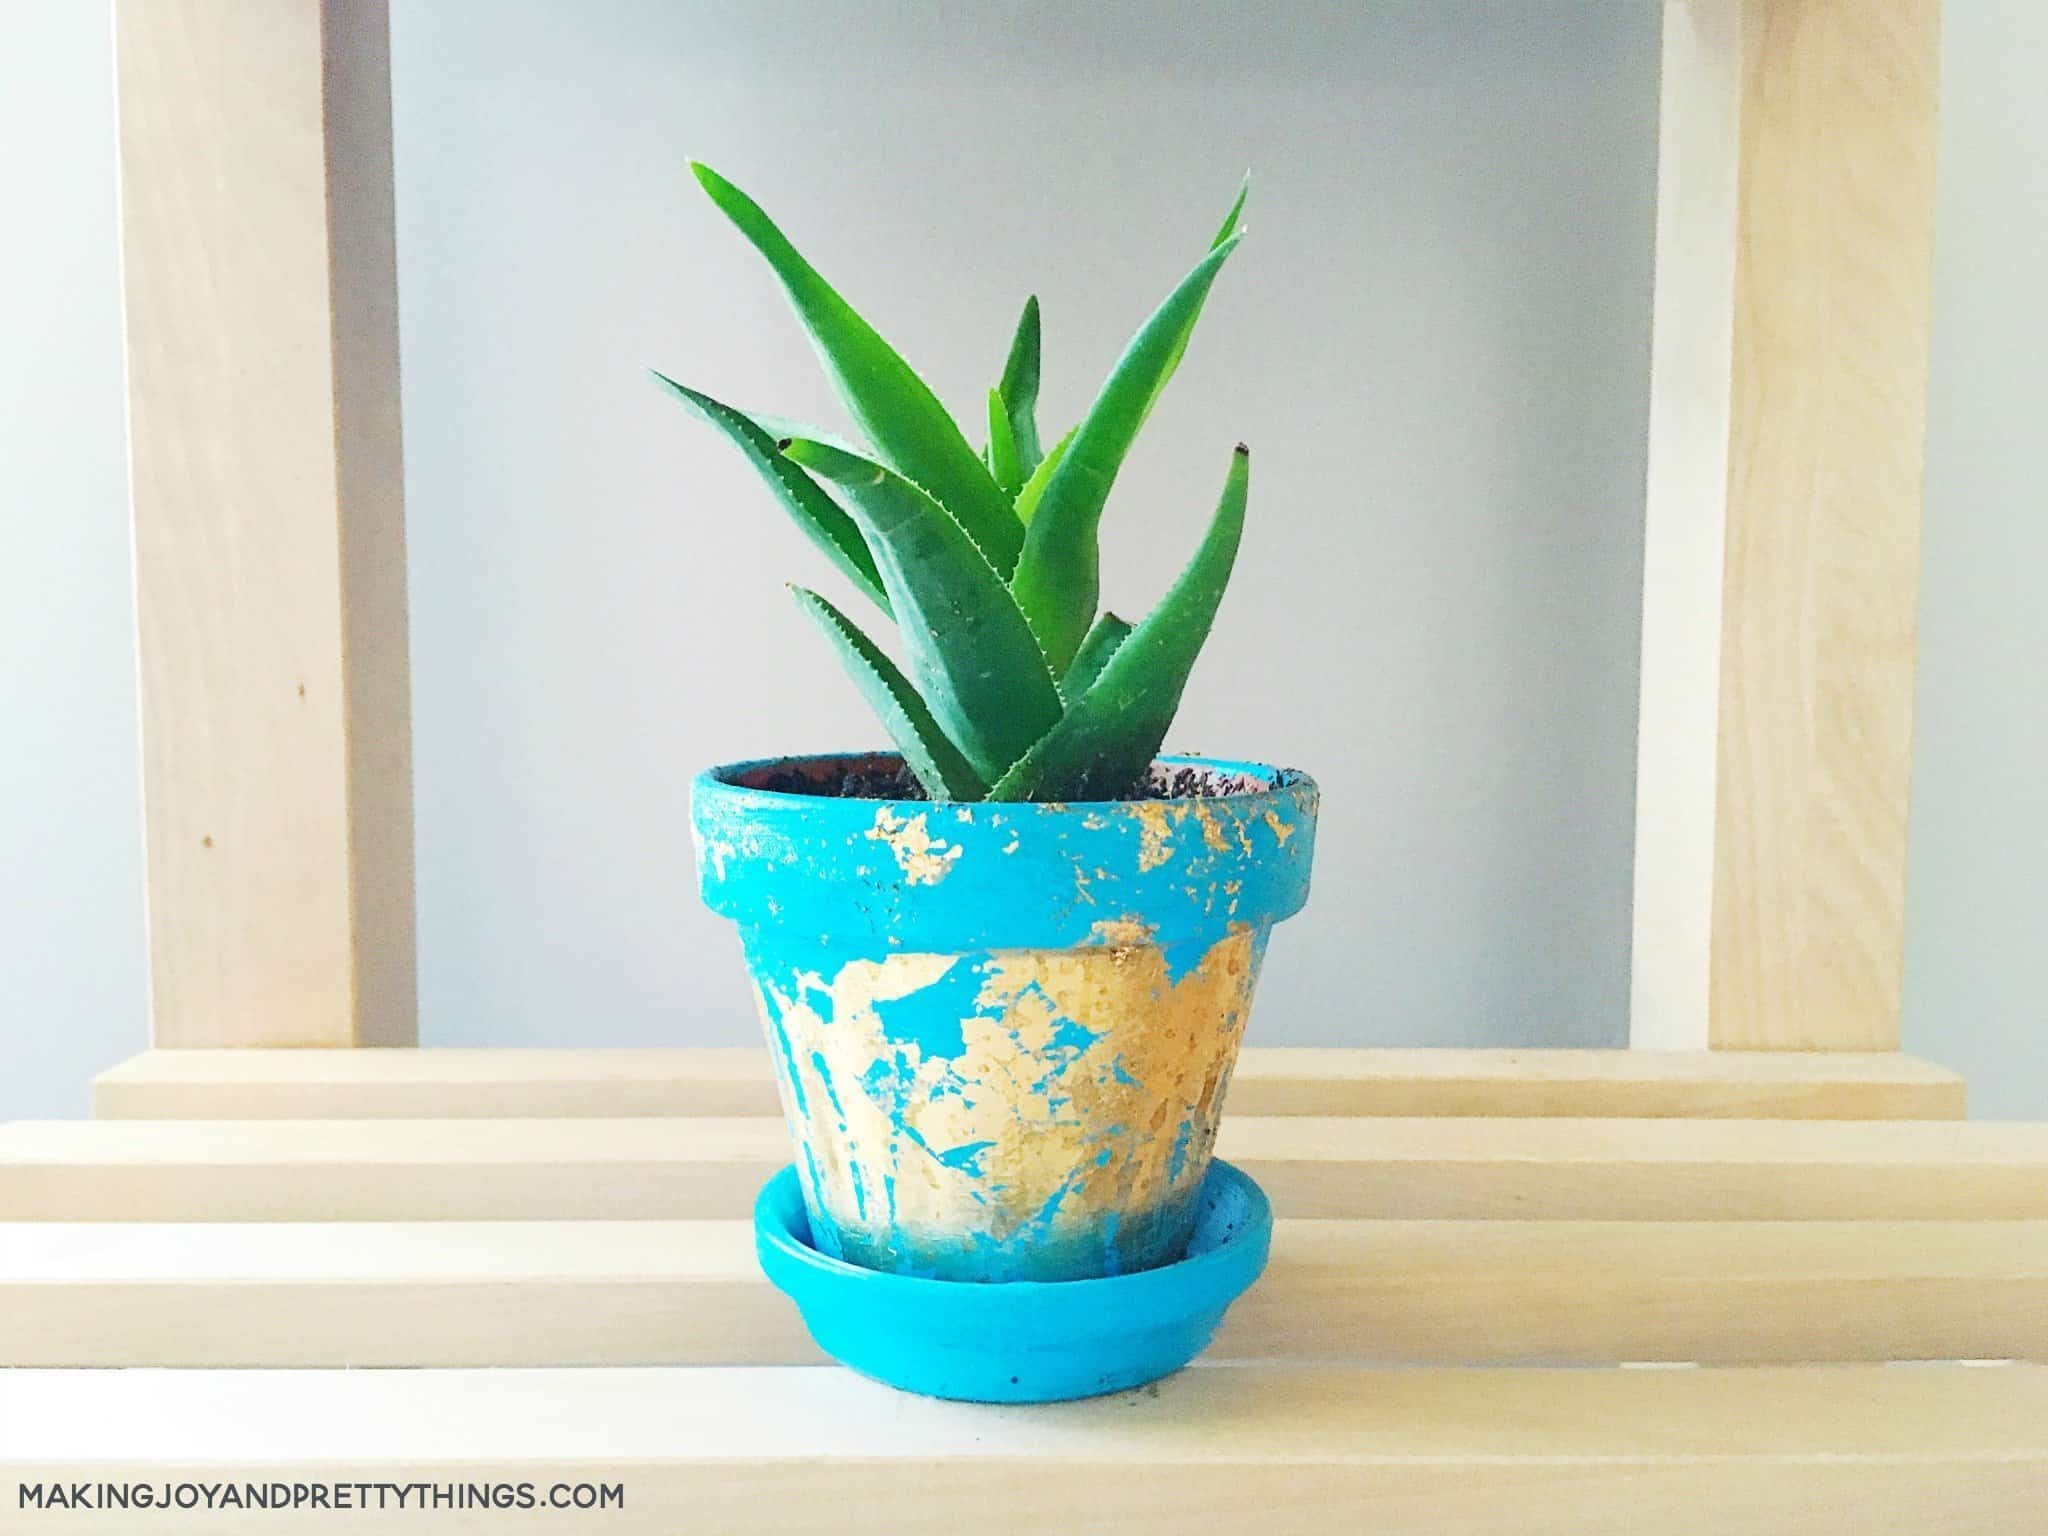 Aloe plant in a DIY gold leaf planter made from a potted plant idea to makeover a terra cotta pot